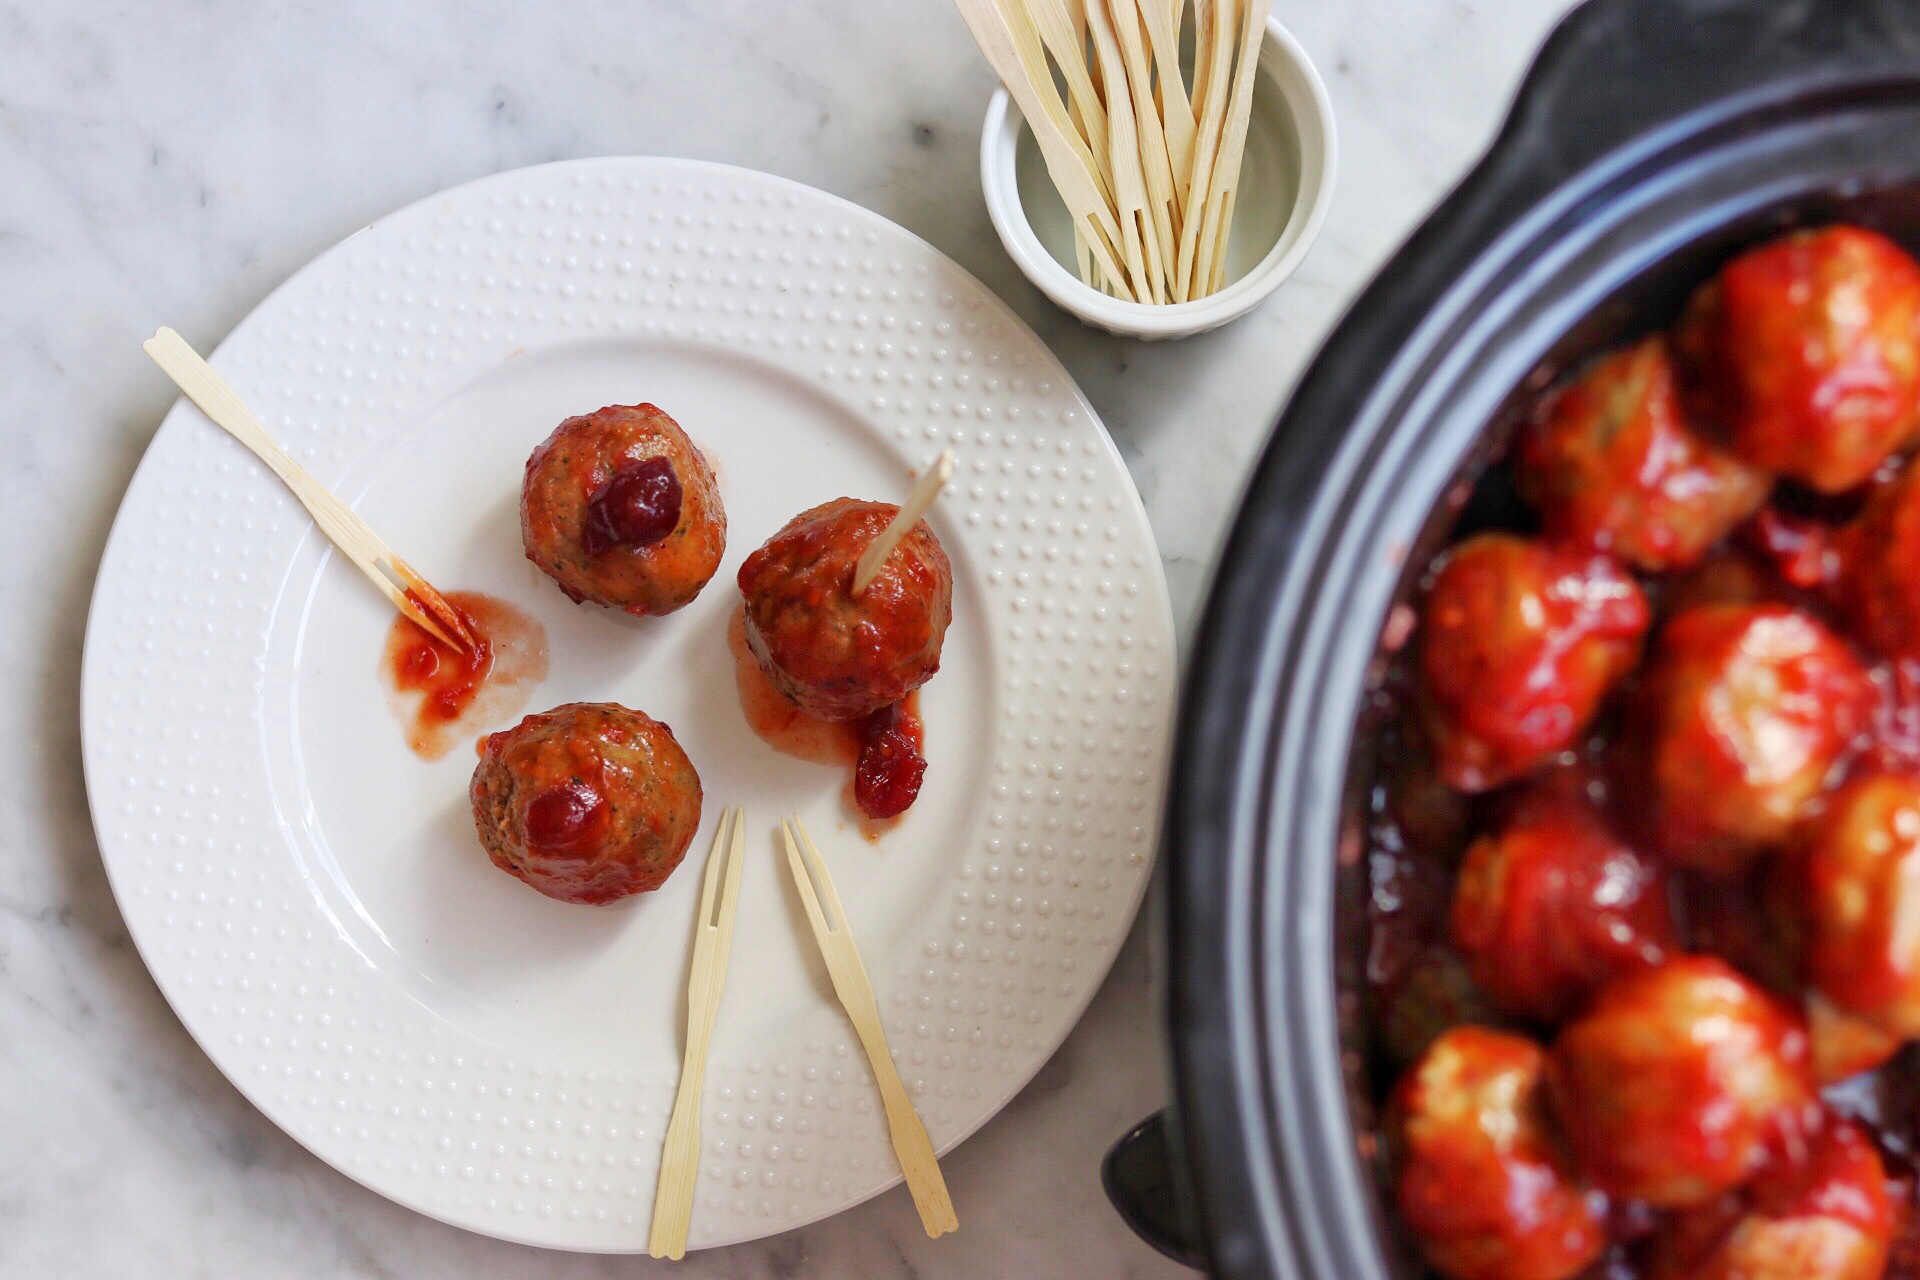 chili and cranberry sauce meatballs